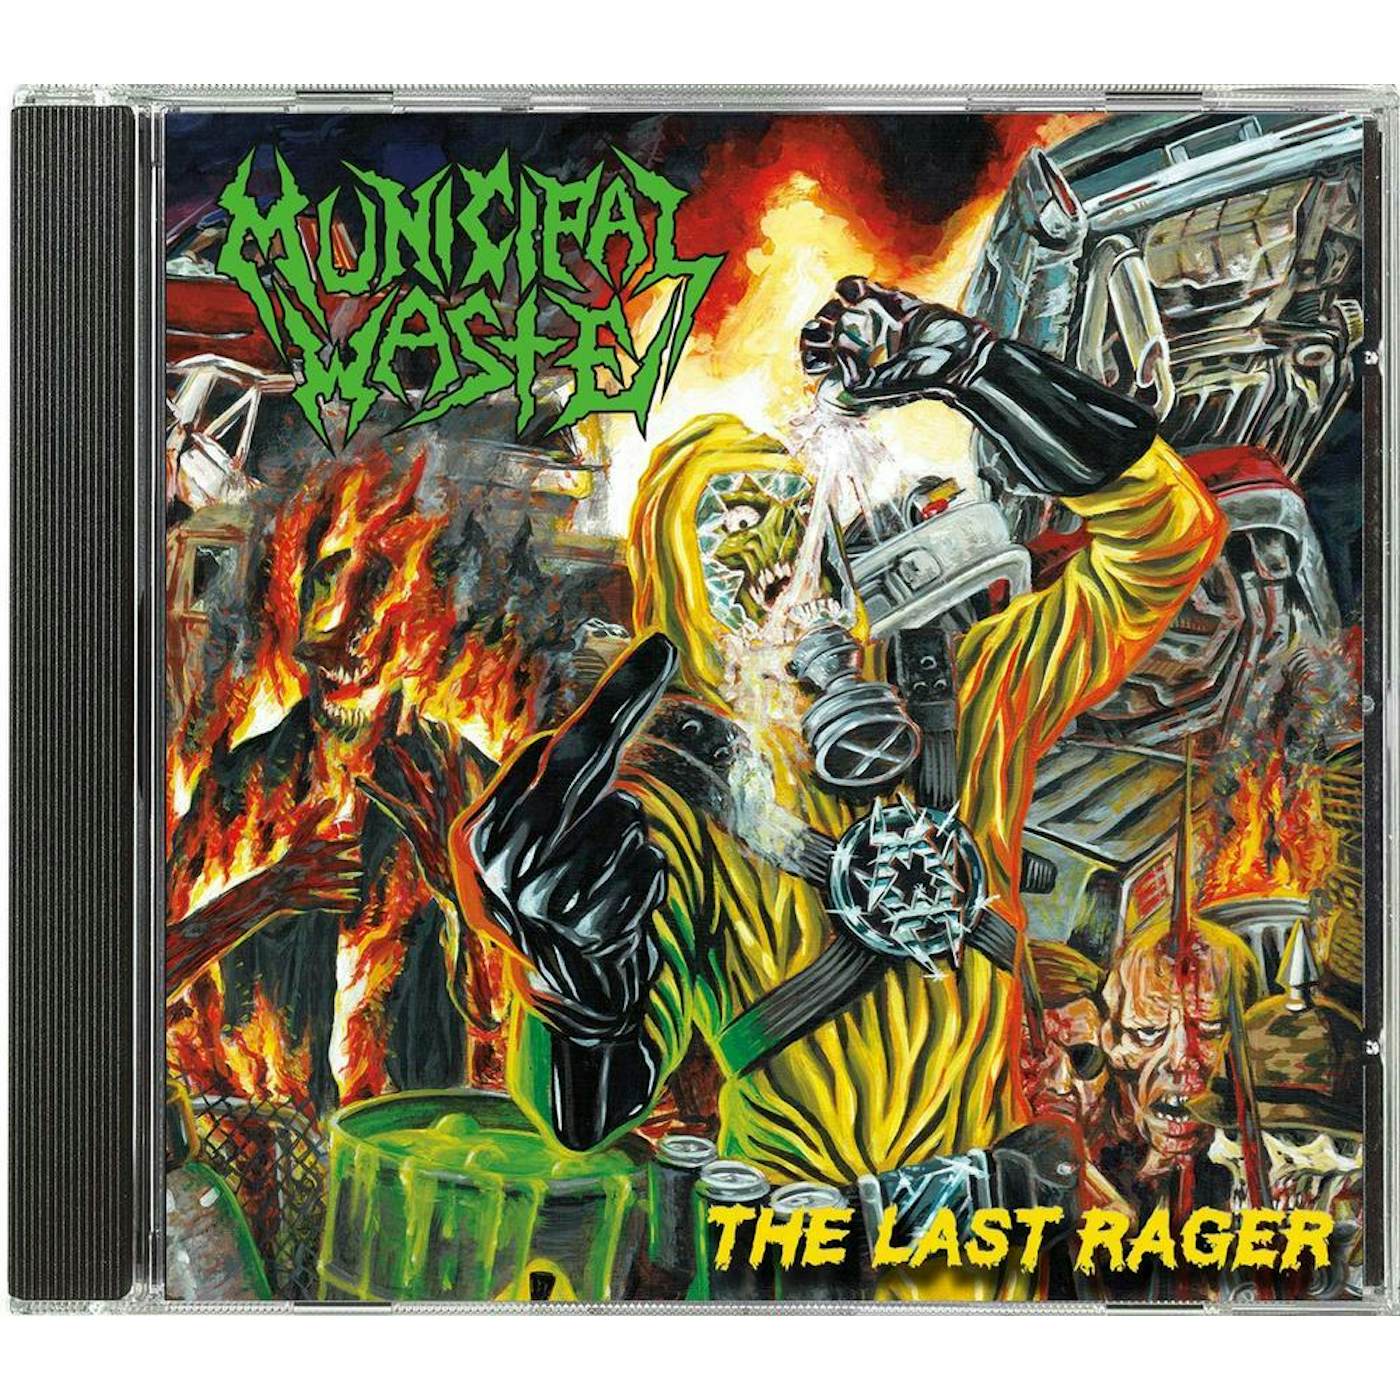 Municipal Waste "The Last Rager" CD